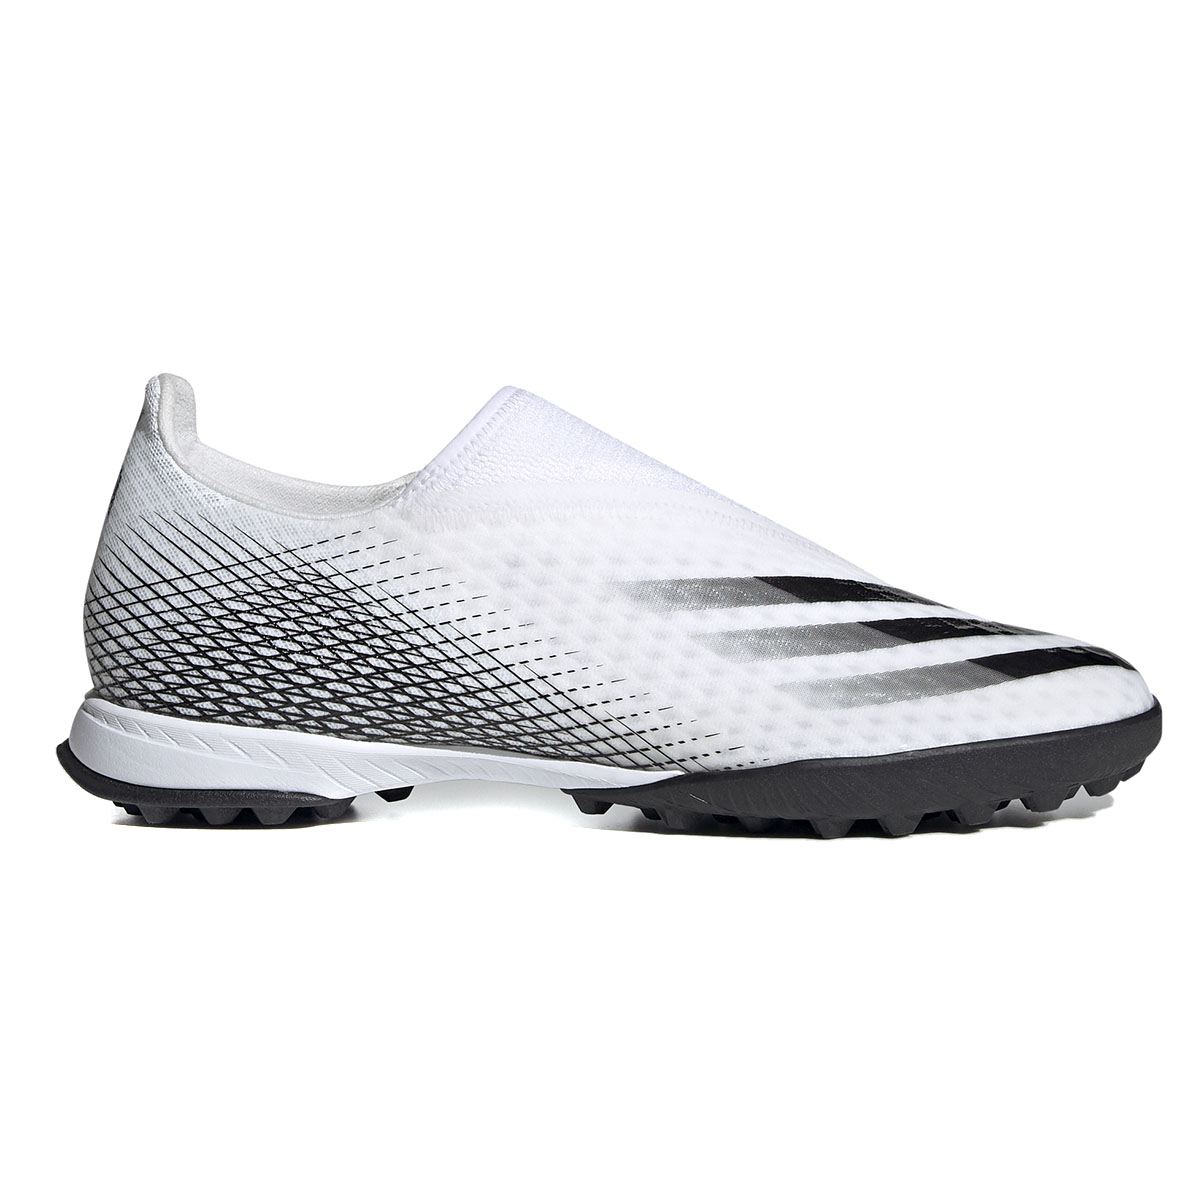 Adidas Men's X x ghosted black Ghosted.3 Cloud White/Core Black/Cloud White